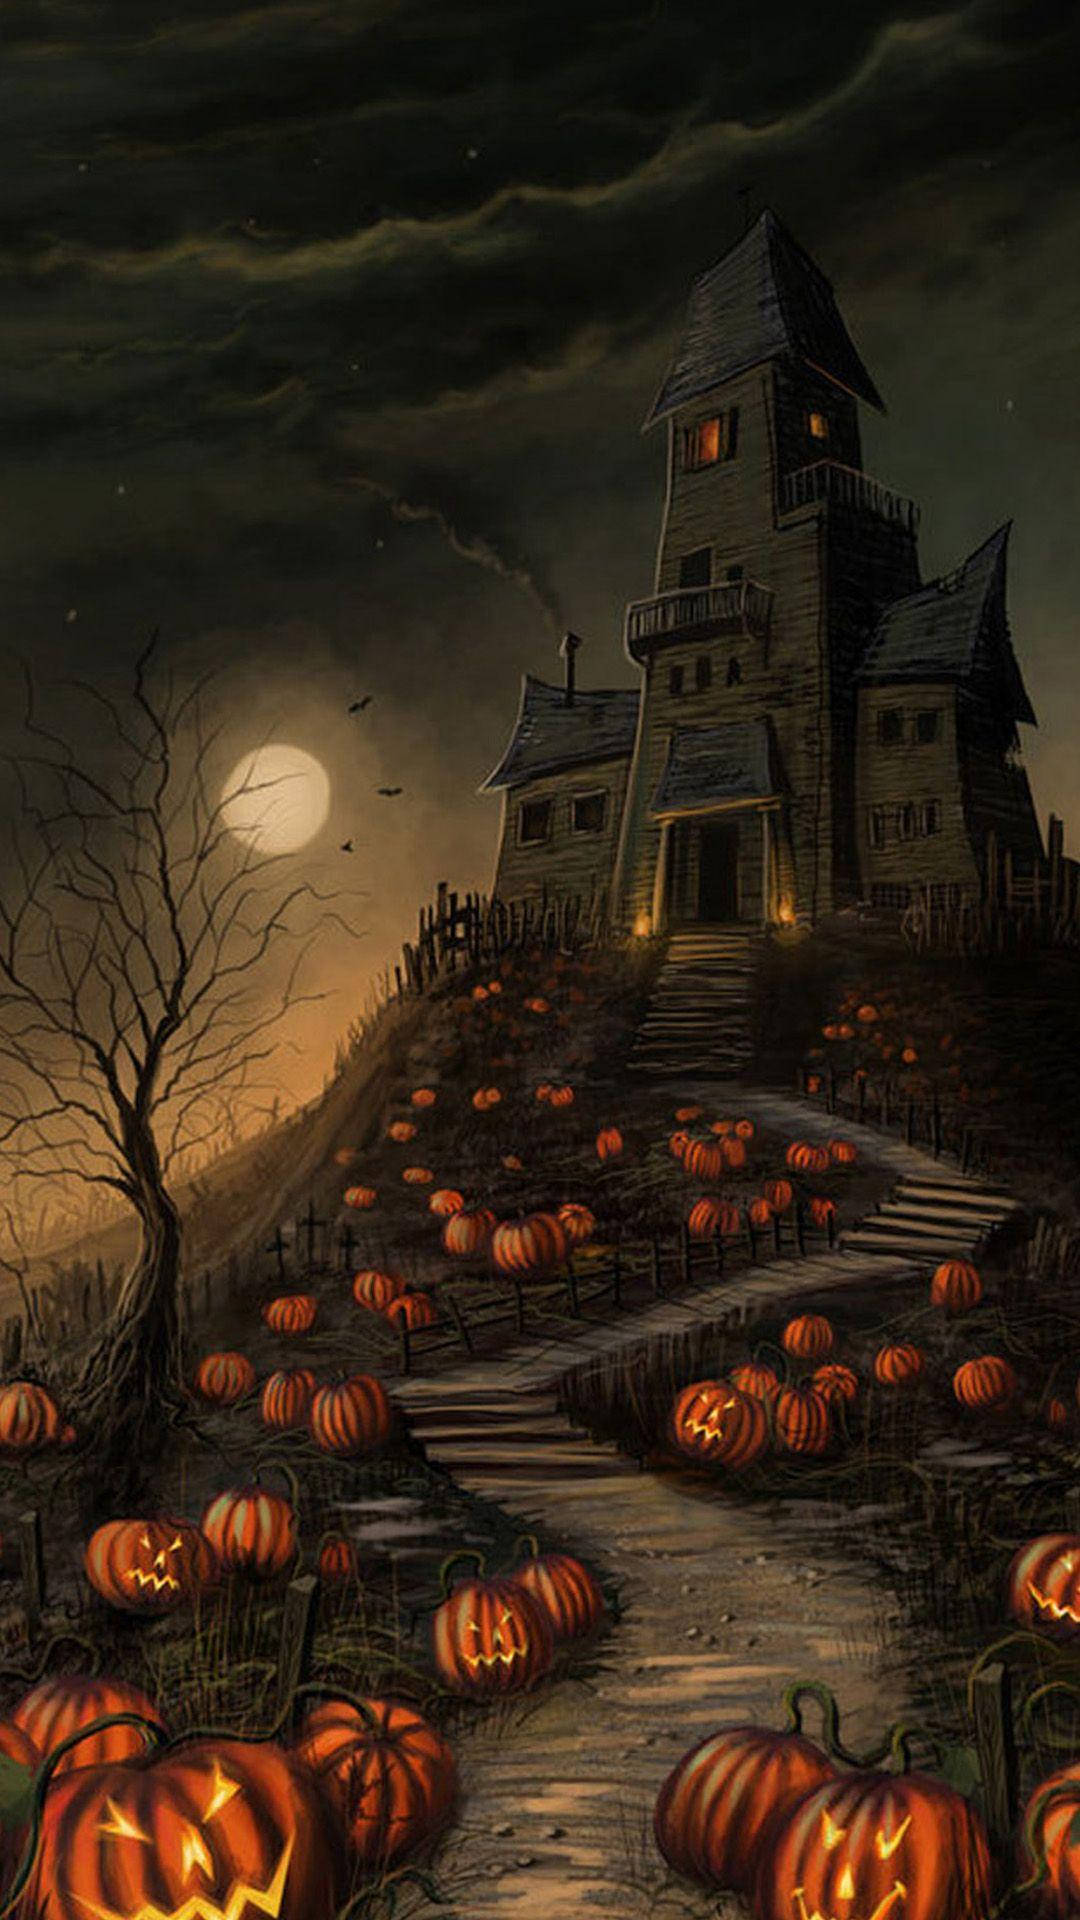 Come Explore Spooky Haunted House On Halloween! Wallpaper